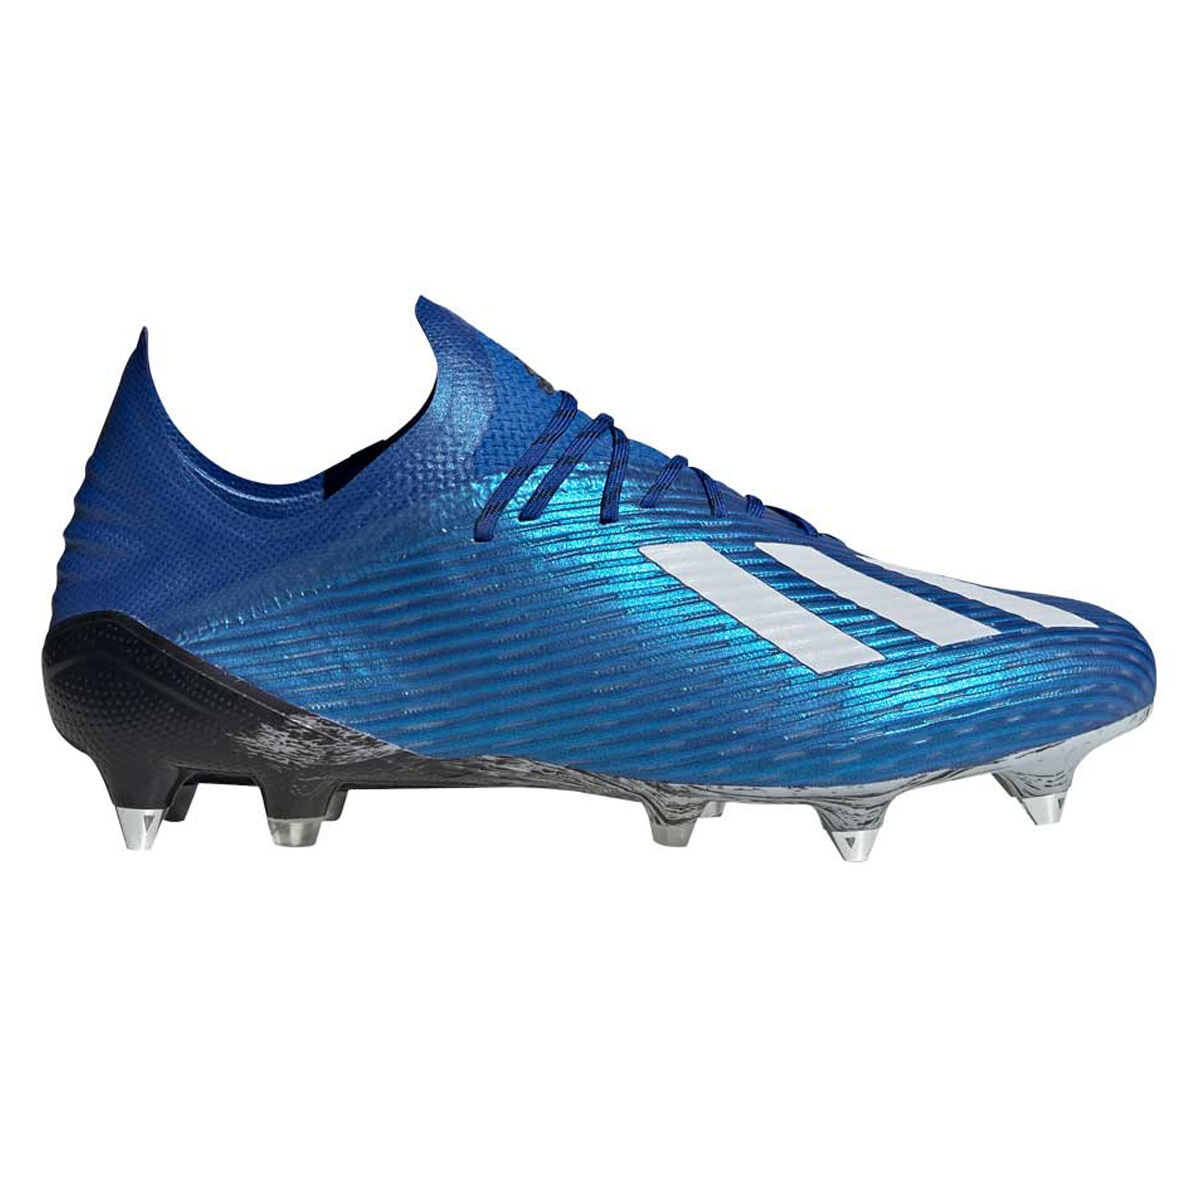 white and blue adidas football boots